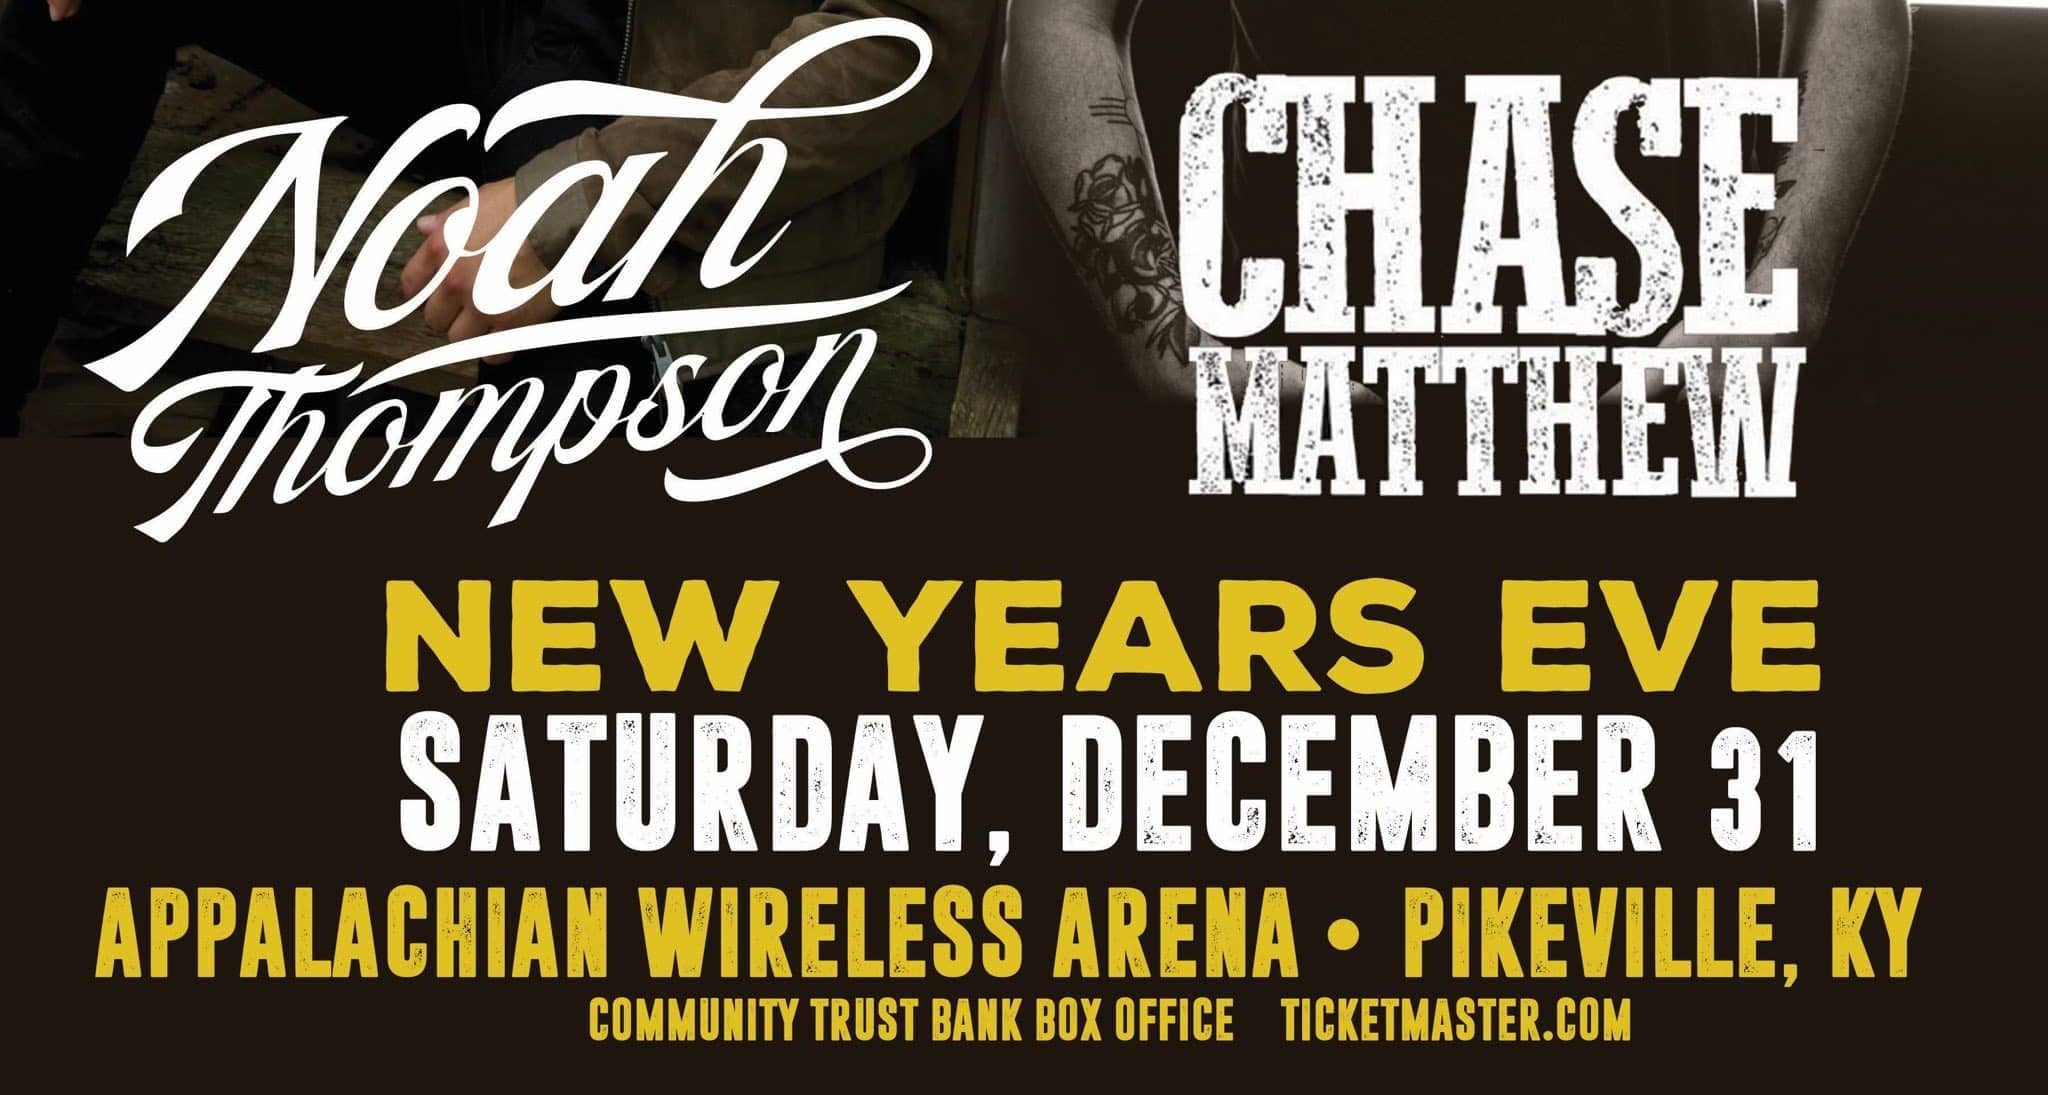 Noah Thompson and Chase Matthew Performing New Years Eve Concert at